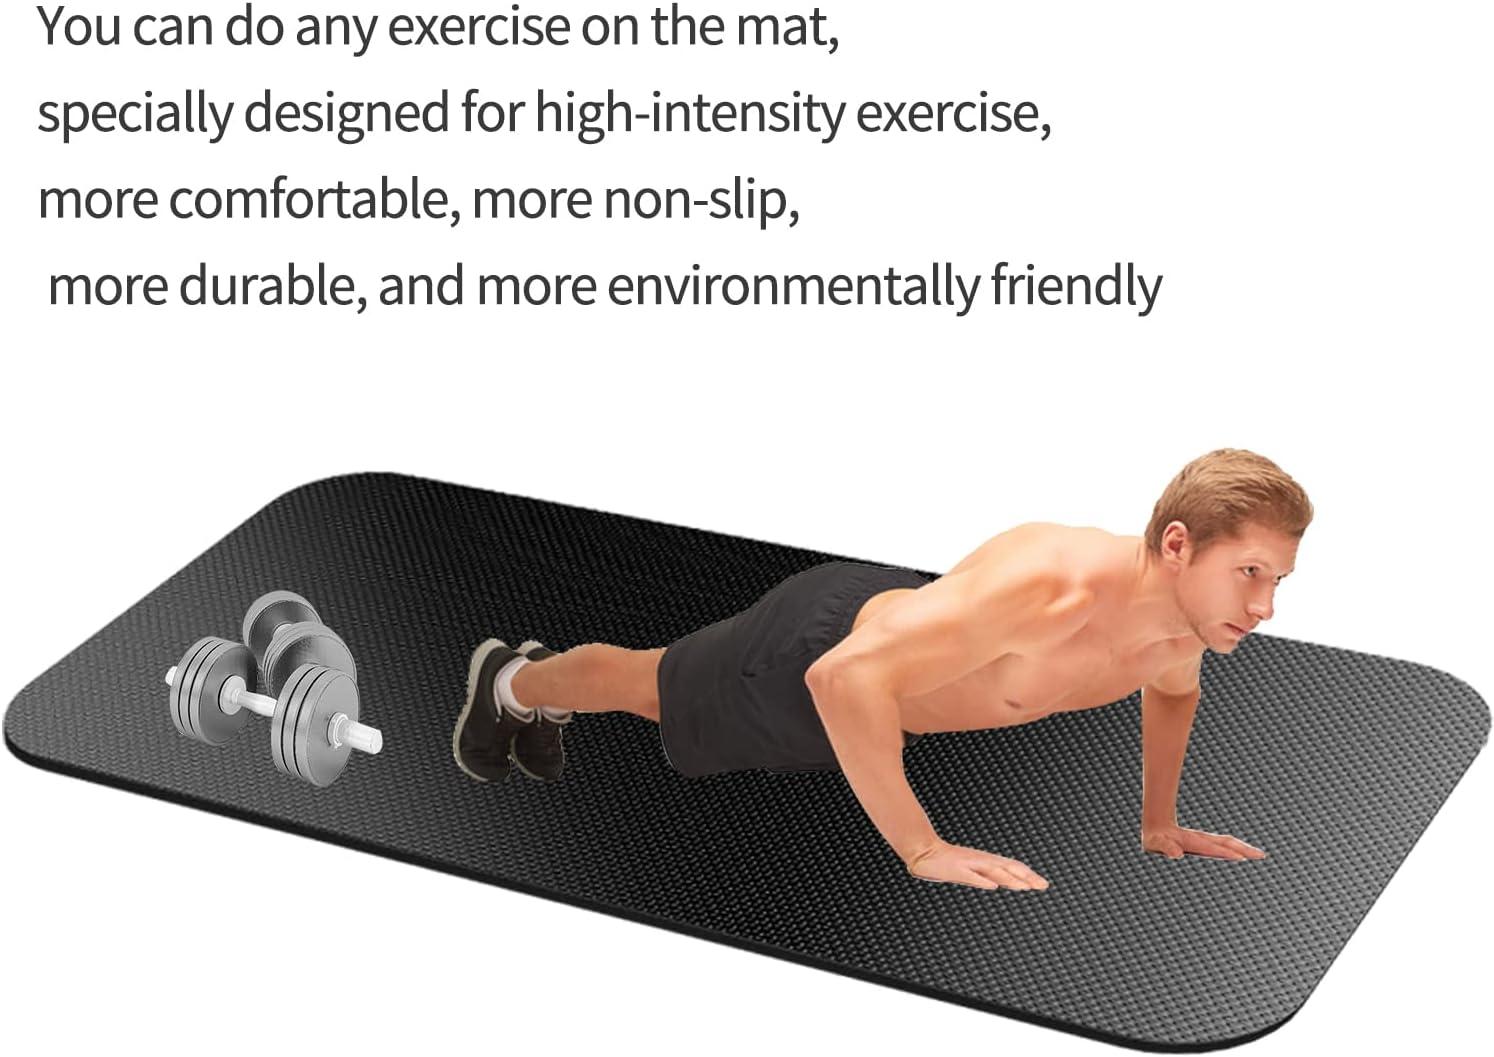 Home Gym Floor Protector Mat for Fitness & Exercise Equipment